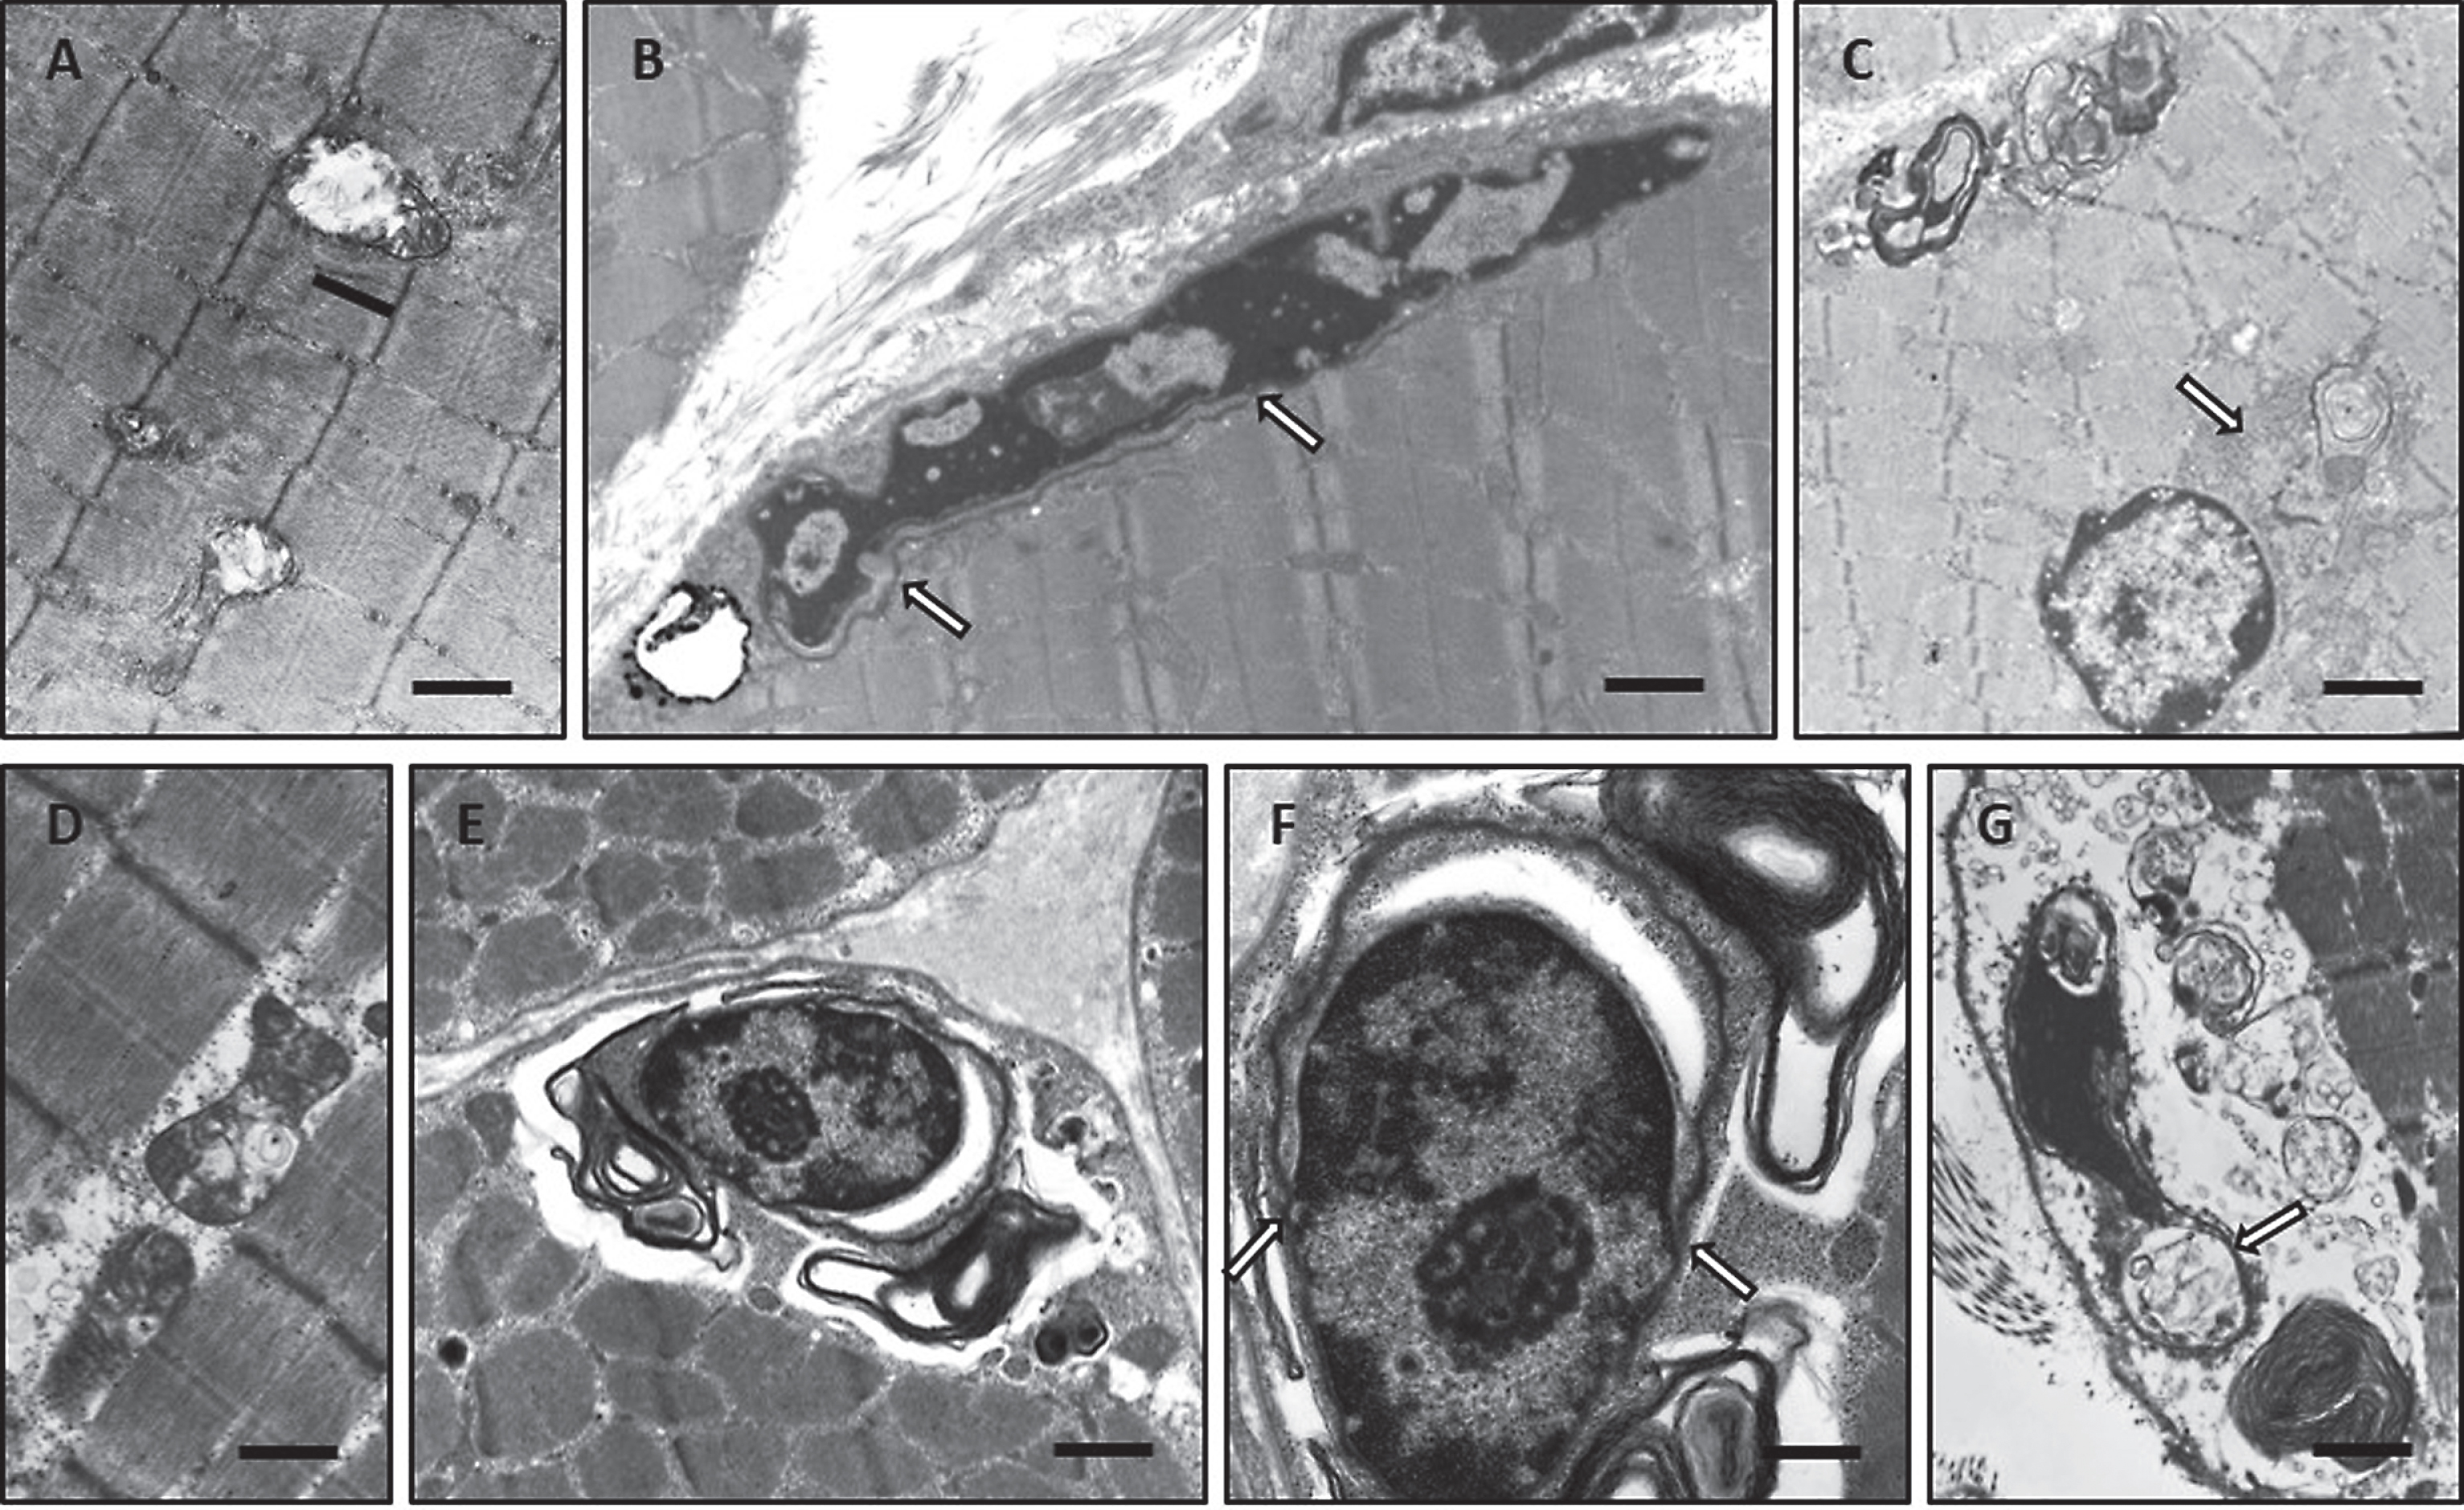 Ultrastructural alterations in woozy mouse quadriceps muscle at age of 26 weeks (A–C) and in genetically proven MSS-patients (D–G) analysed by transmission electron microscopy. (A) Disrupted intermyofibrillar mitochondria. Scale bar = 1.4 μm. (B) Pyknotic, degenerating myonucleus showing lift-off of the nuclear envelope (white arrows) specific for SIL1 deficiency. Scale bar = 1.3 μm. (C) Prominently widened and proliferated SR (white arrow) associated with autophagic material adjacent to a centralised myonucleus as well as accumulation of autophagic, myelin-like material in the sub-sarcolemmal space. Scale bar = 2.5 μm. (D) Disrupted intermyofibrillar mitochondria. Scale bar = 1 μm. (E) Degenerating myonucleus showing lift-off of the nuclear envelope surrounded by electron-dense myelin-like material most likely corresponding to protein aggregates. Scale bar = 1.7 μm. (F) Magnification of E highlighting the lamina fibrosa alteration specific for SIL1-deficiency (white arrows). Scale bar = 0.5 μm. (G) Pyknotic subsarcolemmal myonucleus with massive lift-off of the nuclear envelope (white arrow). Electron-dense myelin-like and granular material is detectable adjacent to the diseased myonucleus as well as within the irregular nuclear envelope loop. Scale bar = 1 μm.